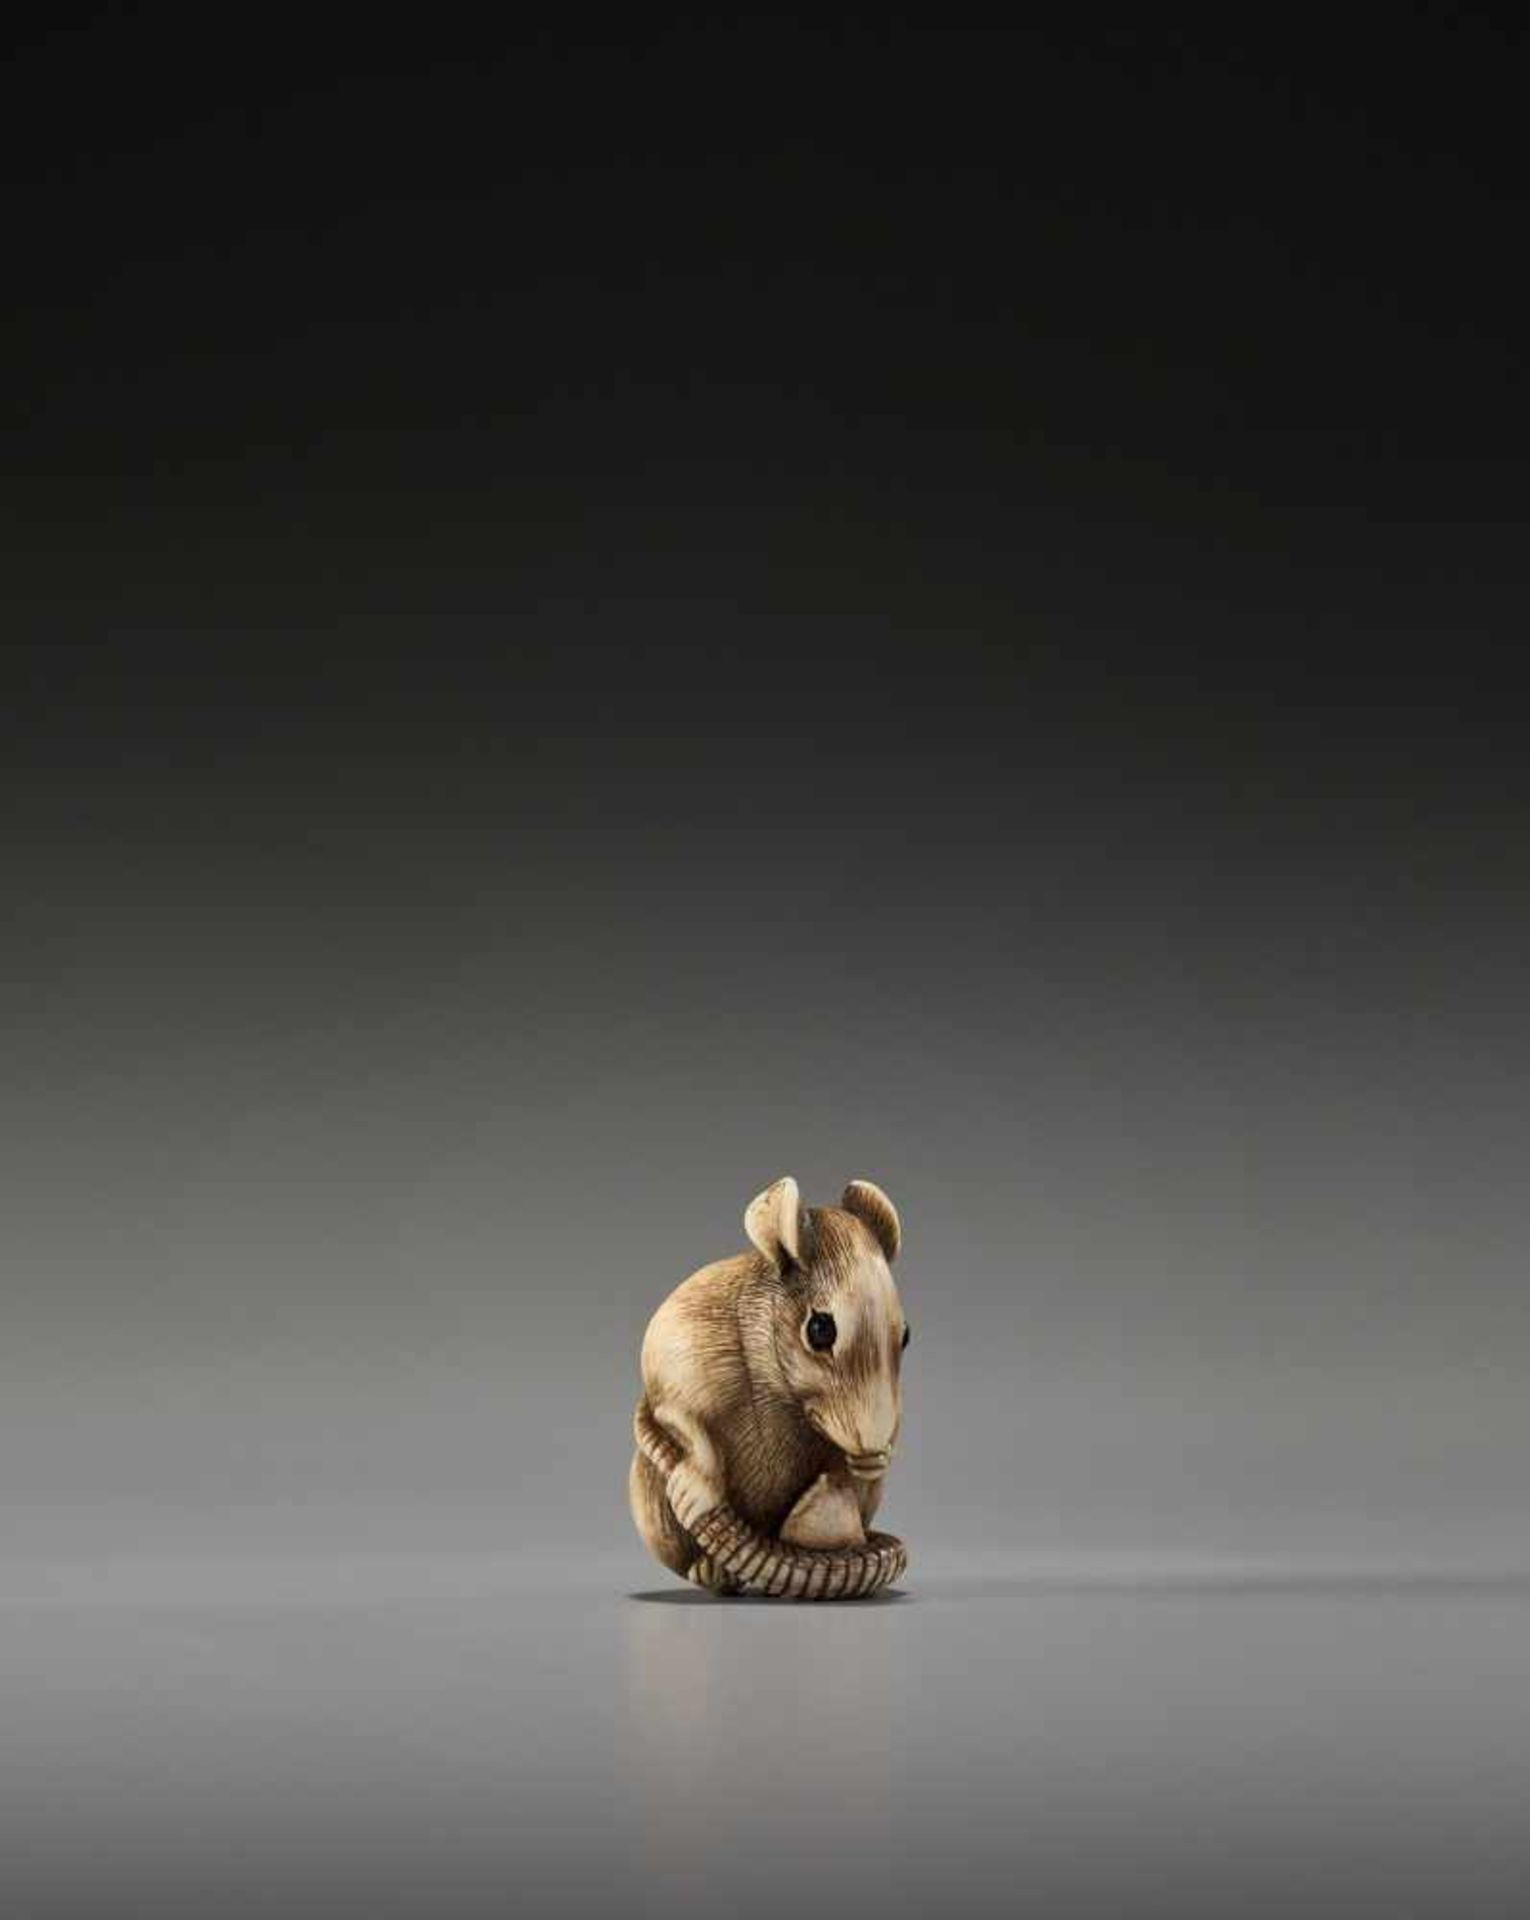 A POWERFUL KYOTO SCHOOL IVORY NETSUKE OF A RAT WITH A BEAN POD - Image 2 of 11